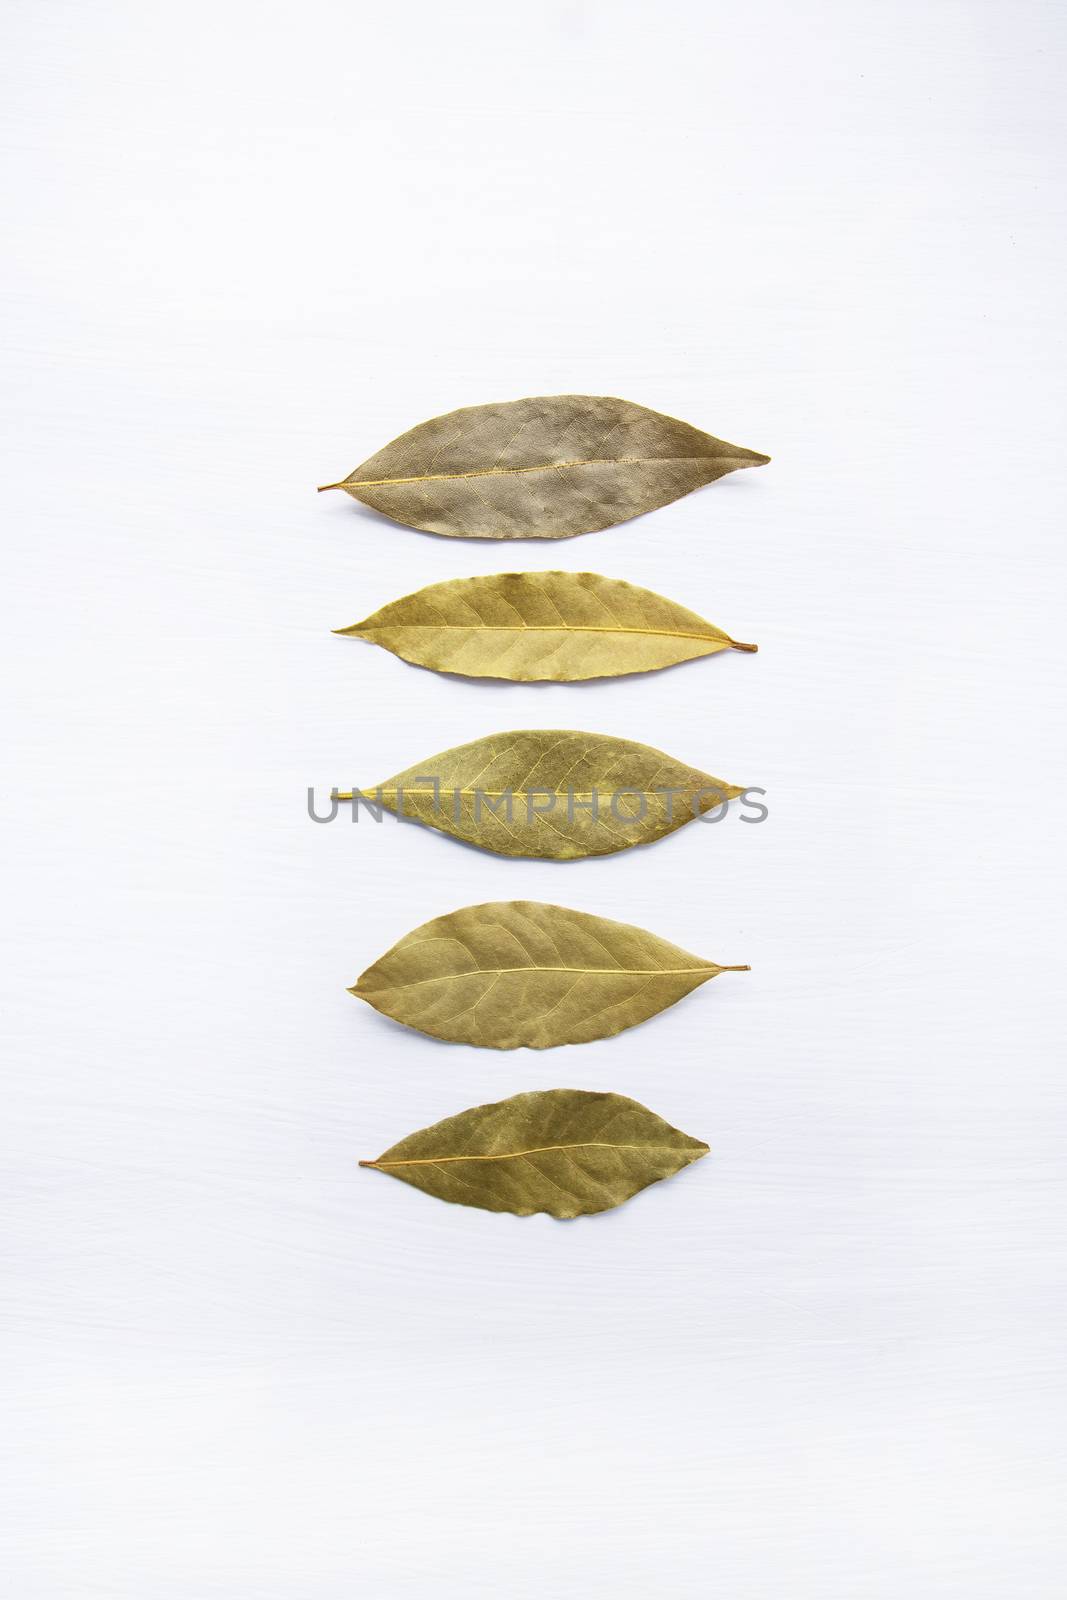 Dried bay leaves isolated on white wooden background with copy s by Bowonpat